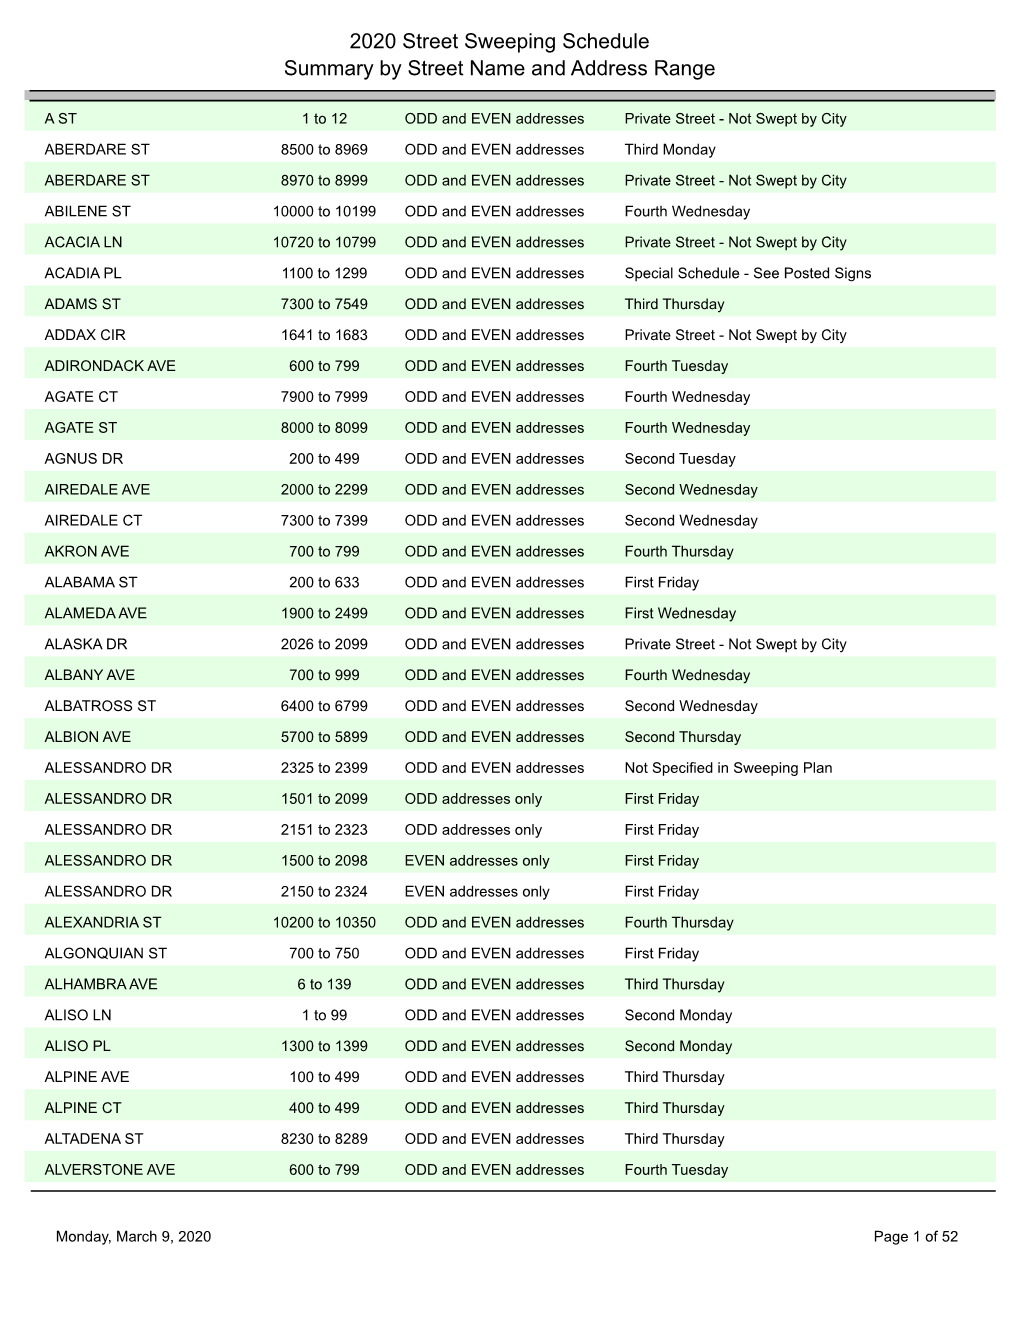 2020 Street Sweeping Schedule Summary by Street Name and Address Range